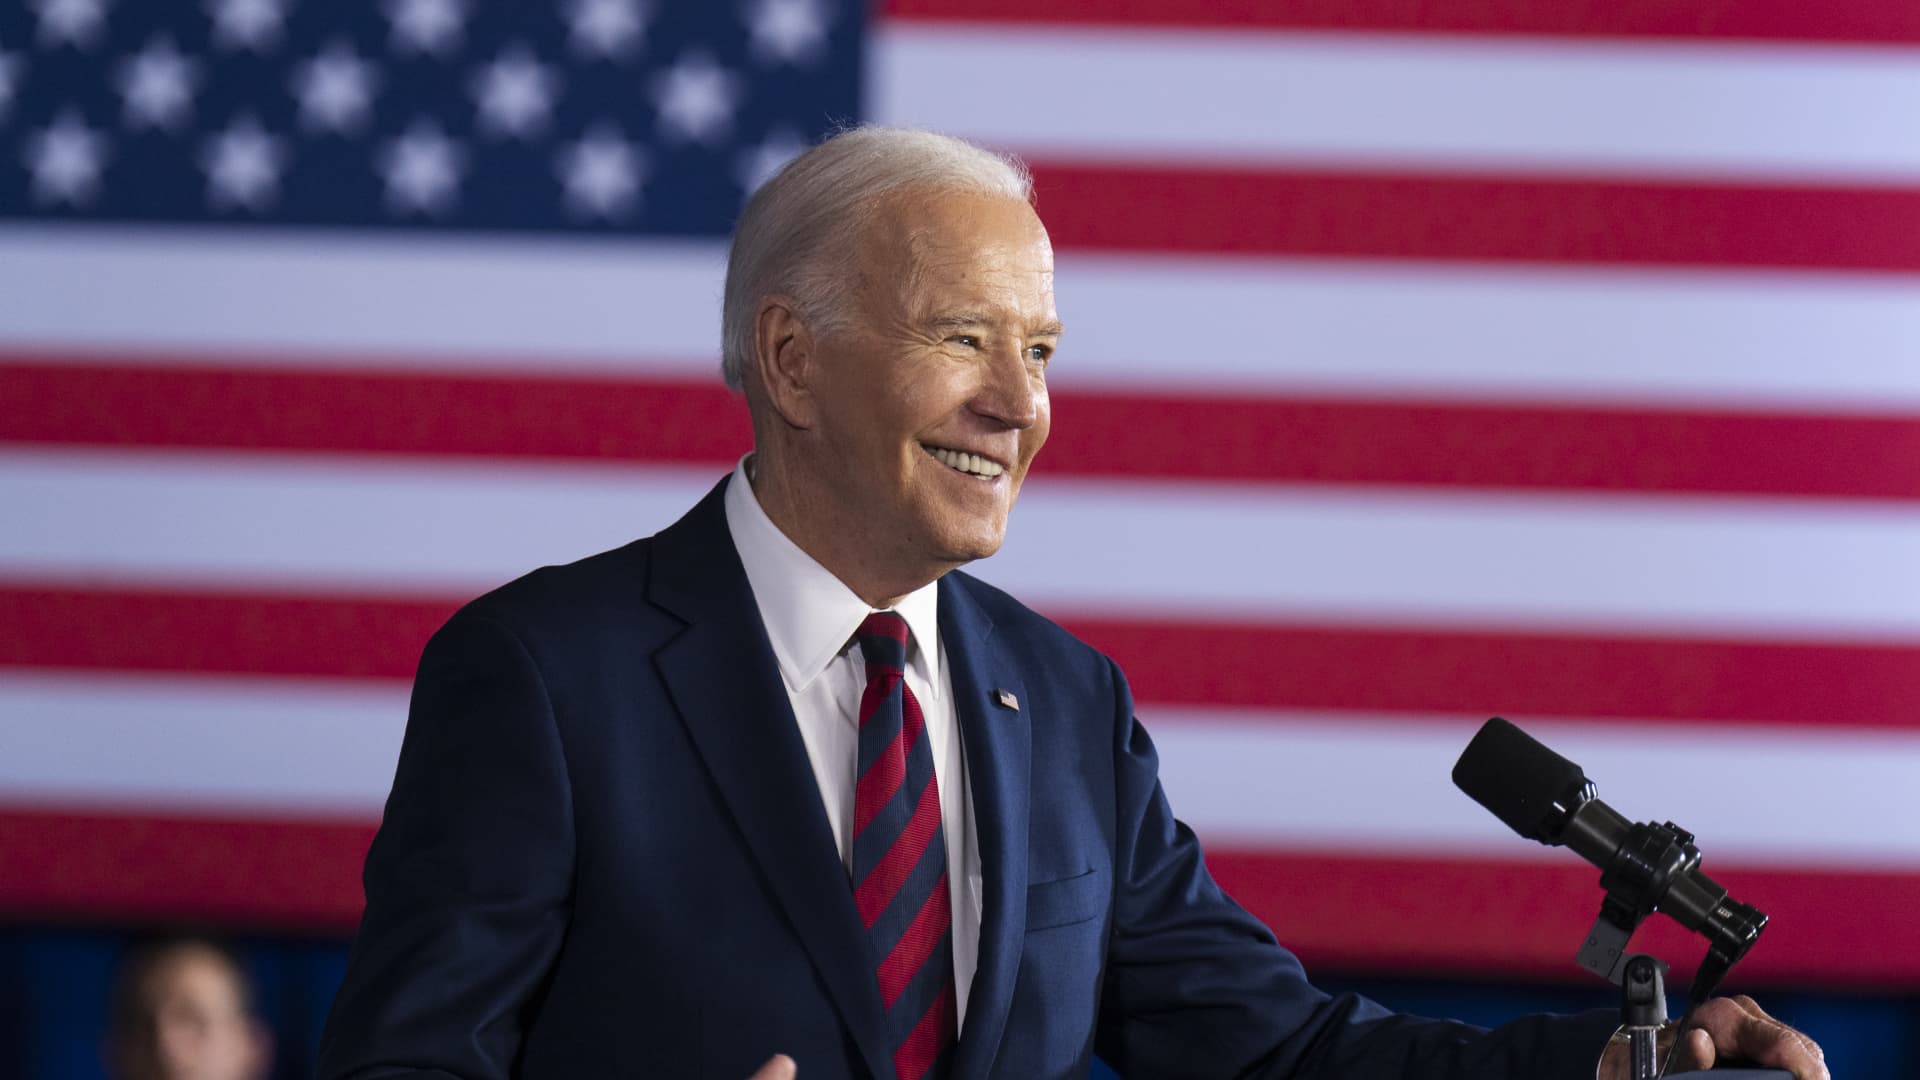 'Almost impossible': Inside Biden's uphill battle to win the backing of key anti-Trump Republicans